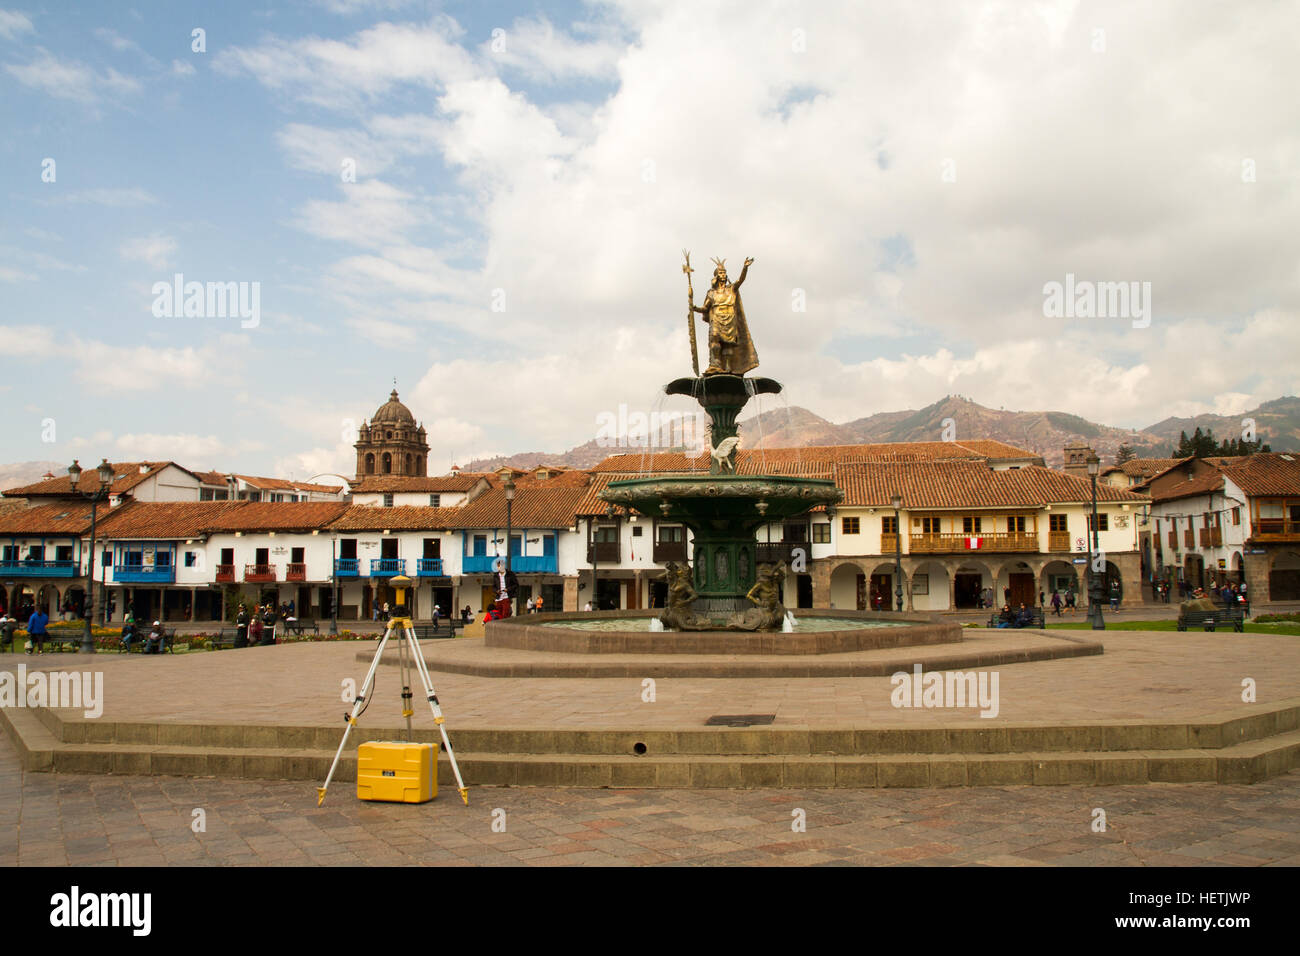 CUSCO - SEPTEMBER 02: Tourists, locals and architecture close-ups on the streets of Cusco, Peru on September 2nd, 2016. Stock Photo